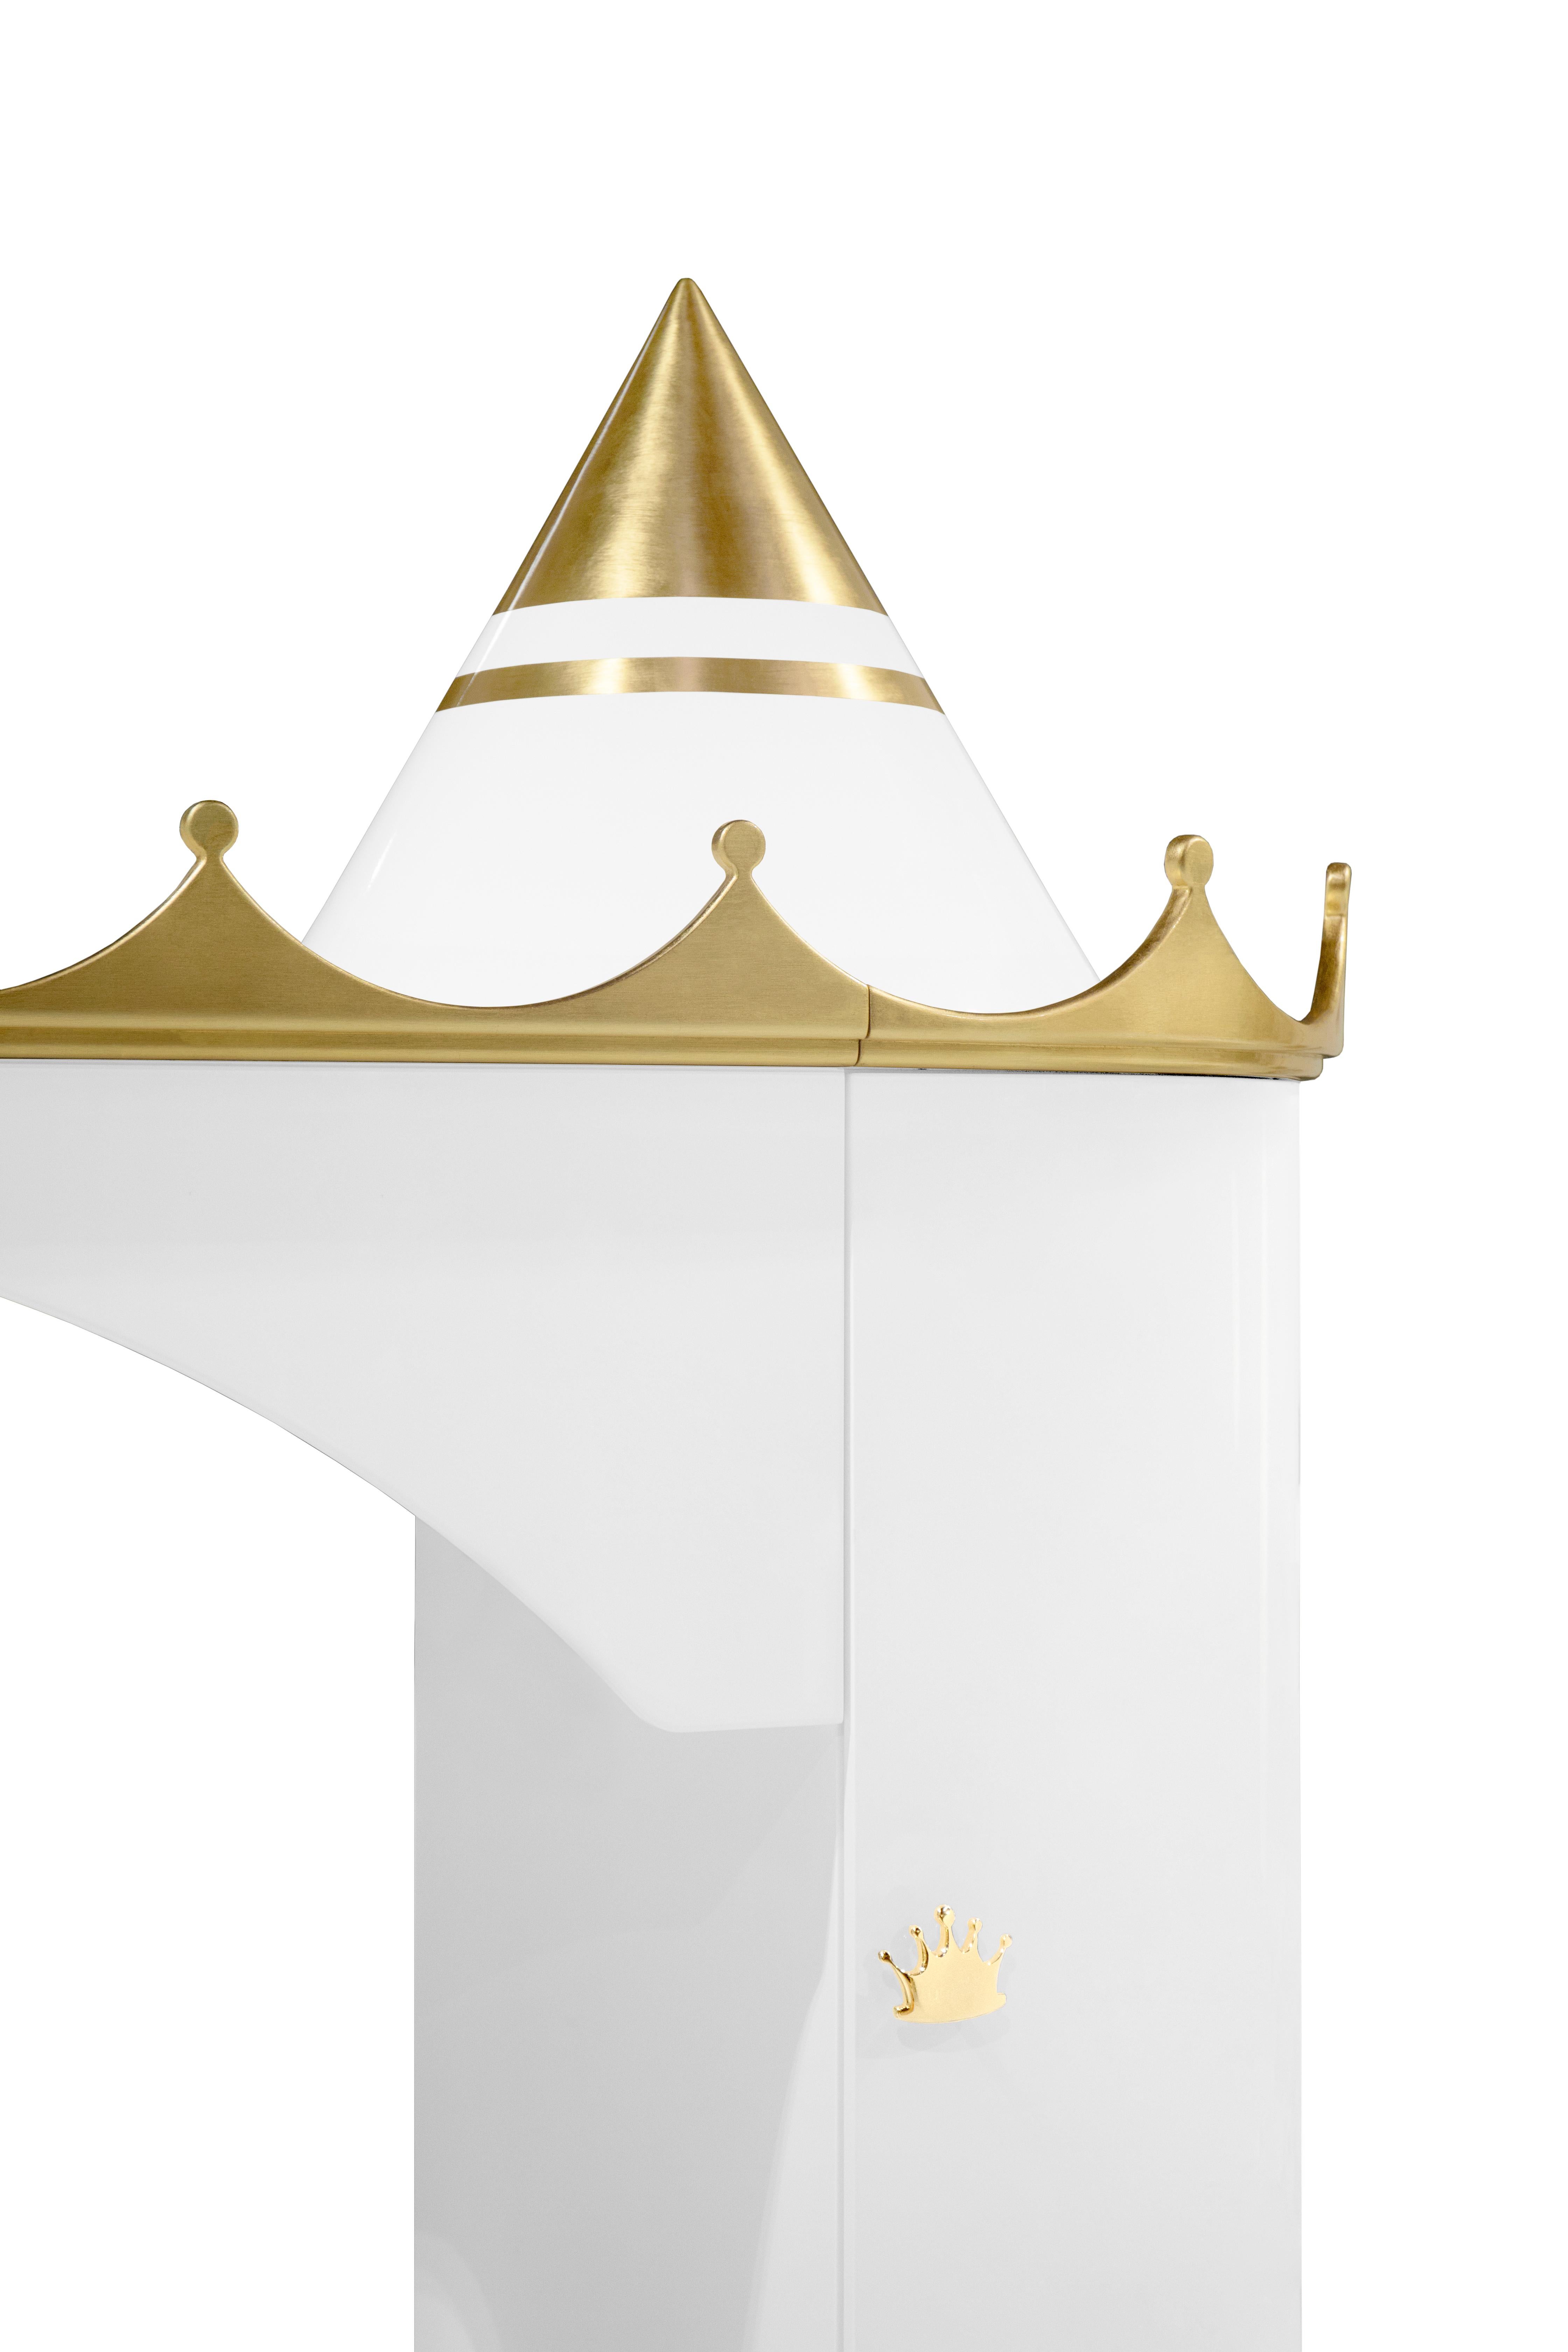 George I Kings & Queens Castle Kids Bed in with Gold Details by Circu Magical Furniture For Sale